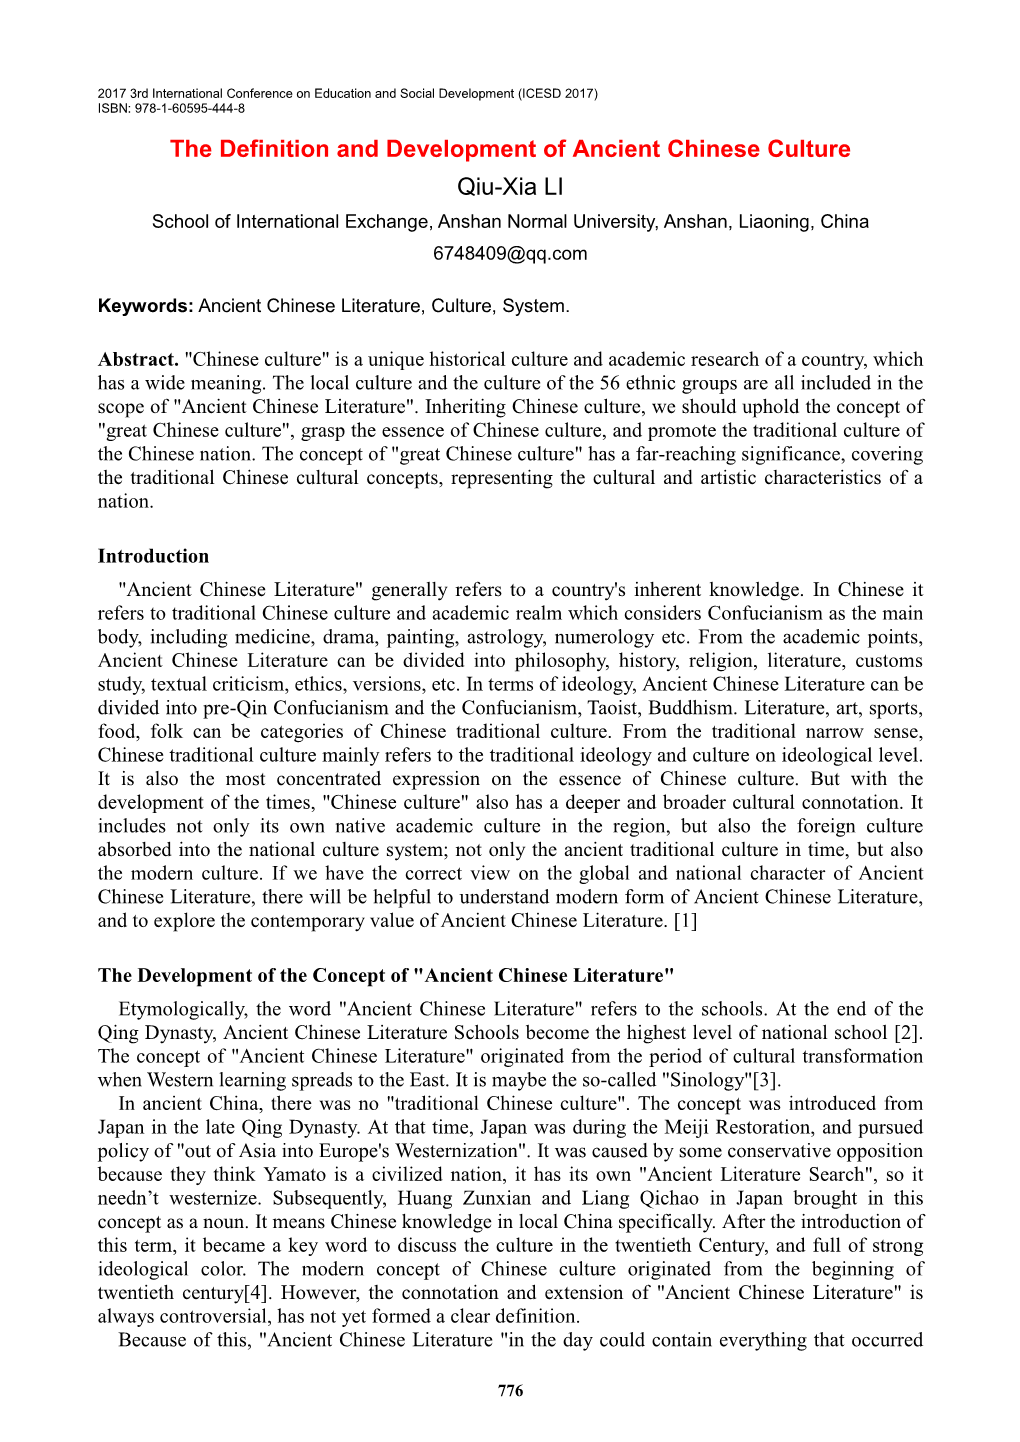 The Definition and Development of Ancient Chinese Culture Qiu-Xia LI